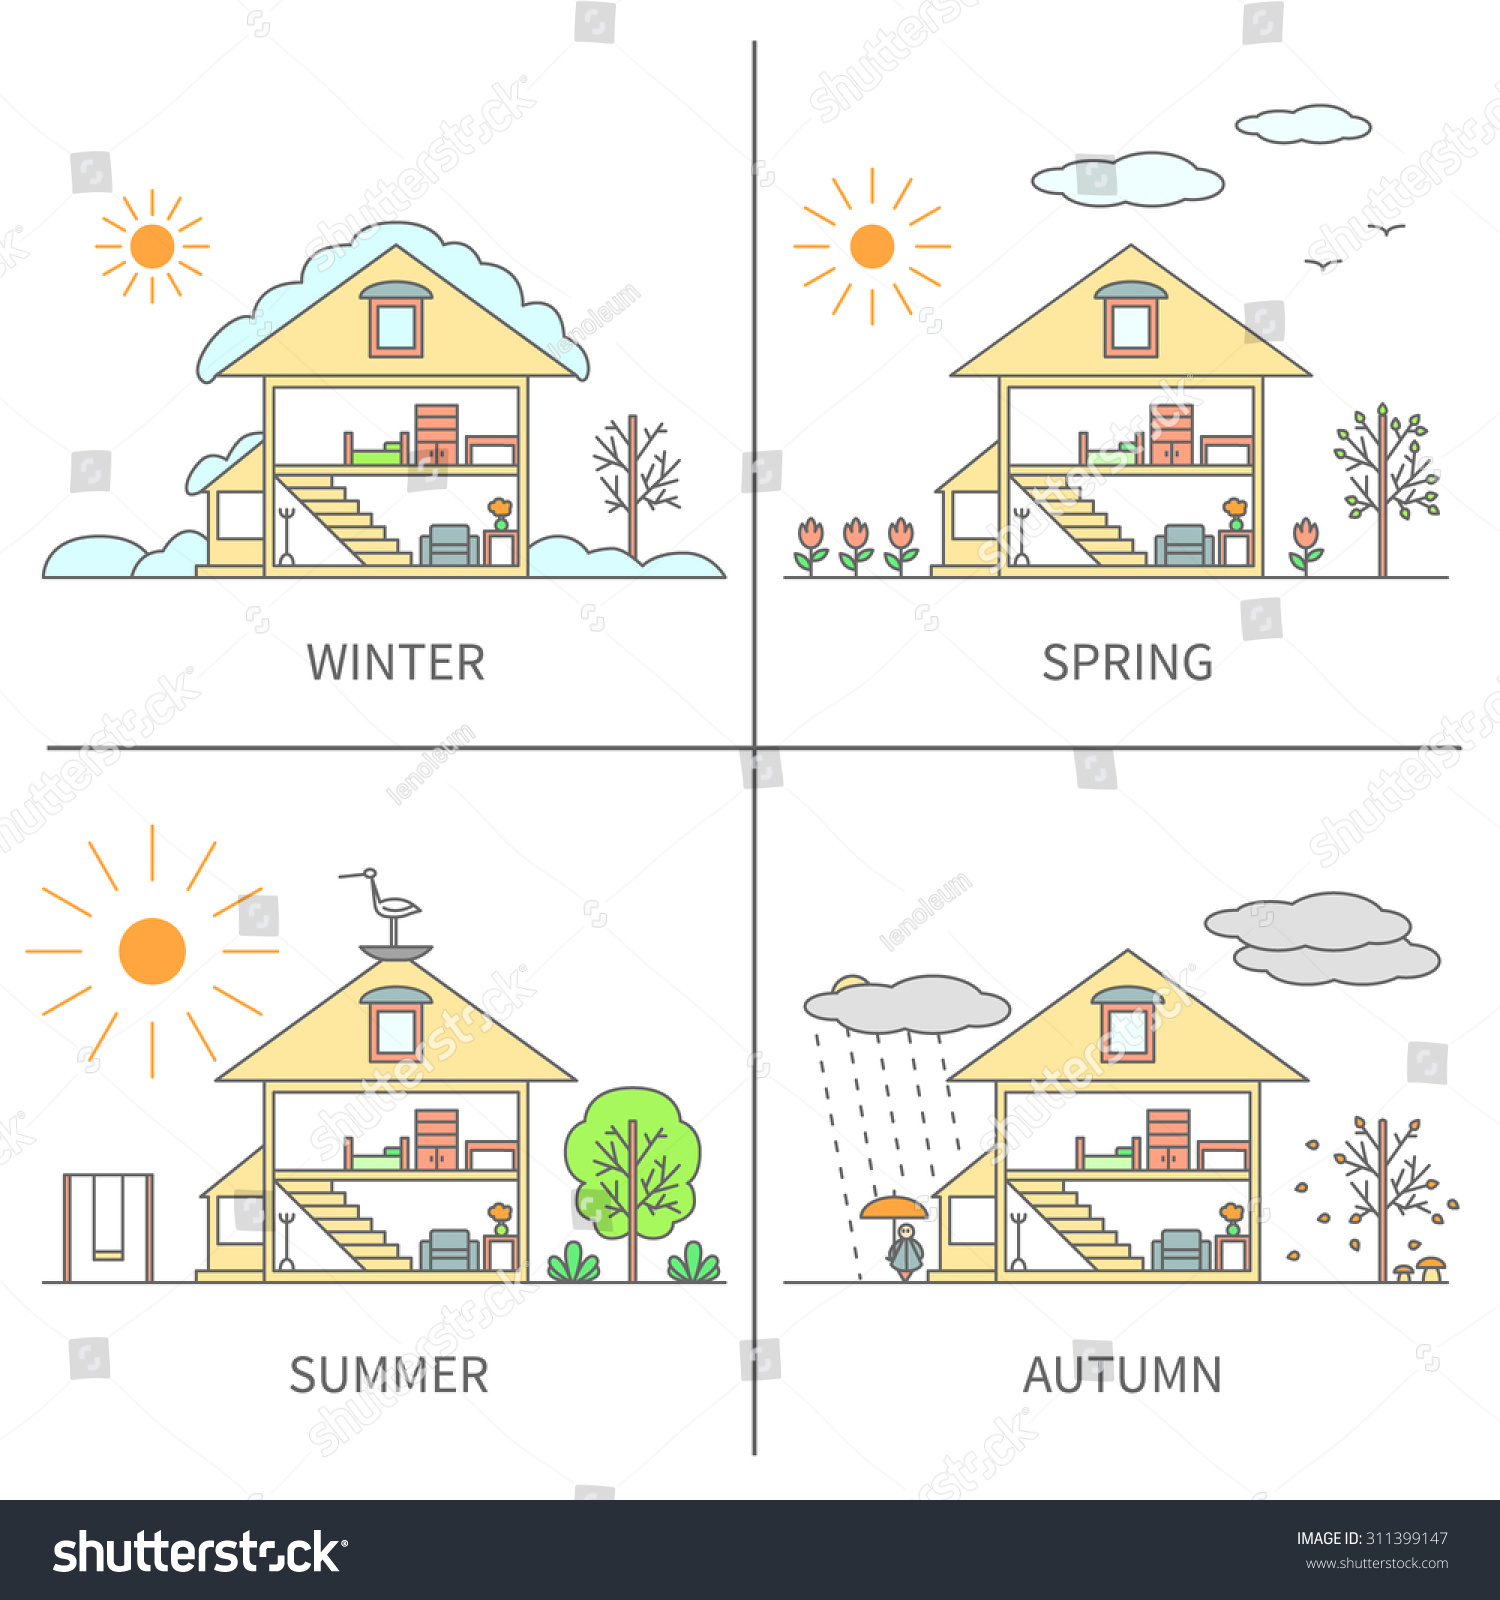 The Same Landscape Scene (House And Yard) In Different Seasons Of The ...